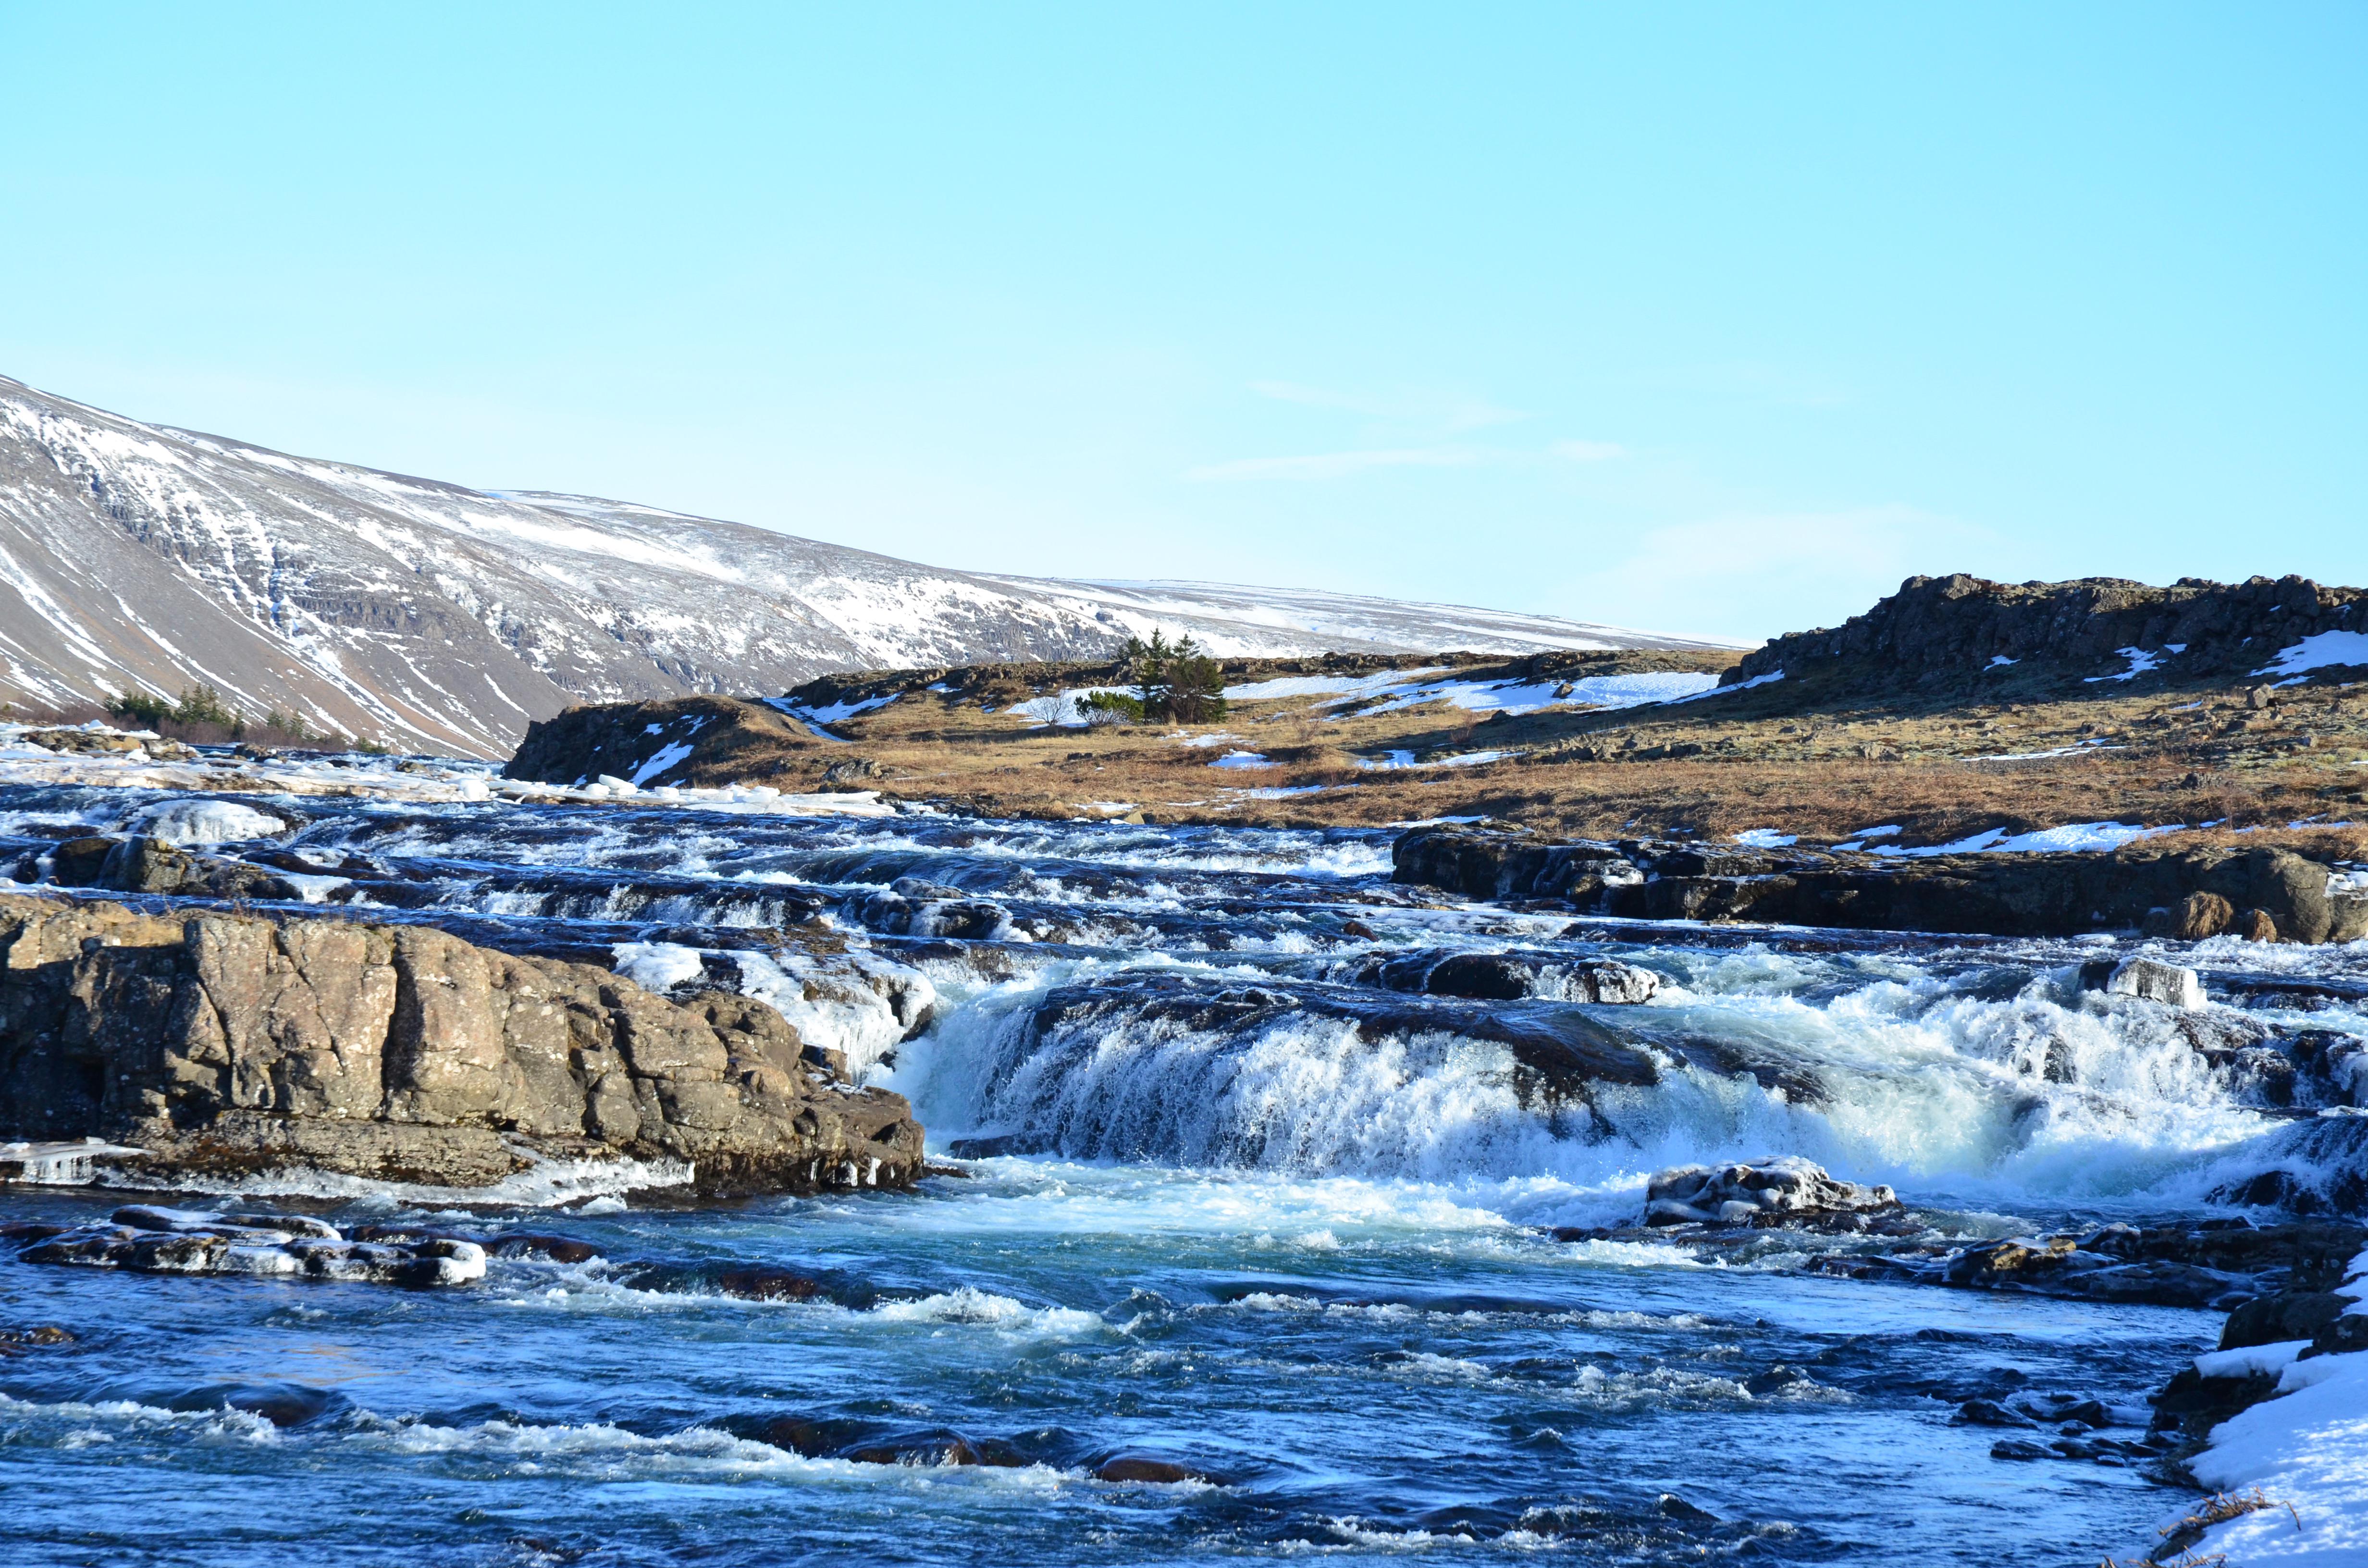 General 4928x3264 landscape Iceland nature waterfall snow winter tundra water sunlight sky